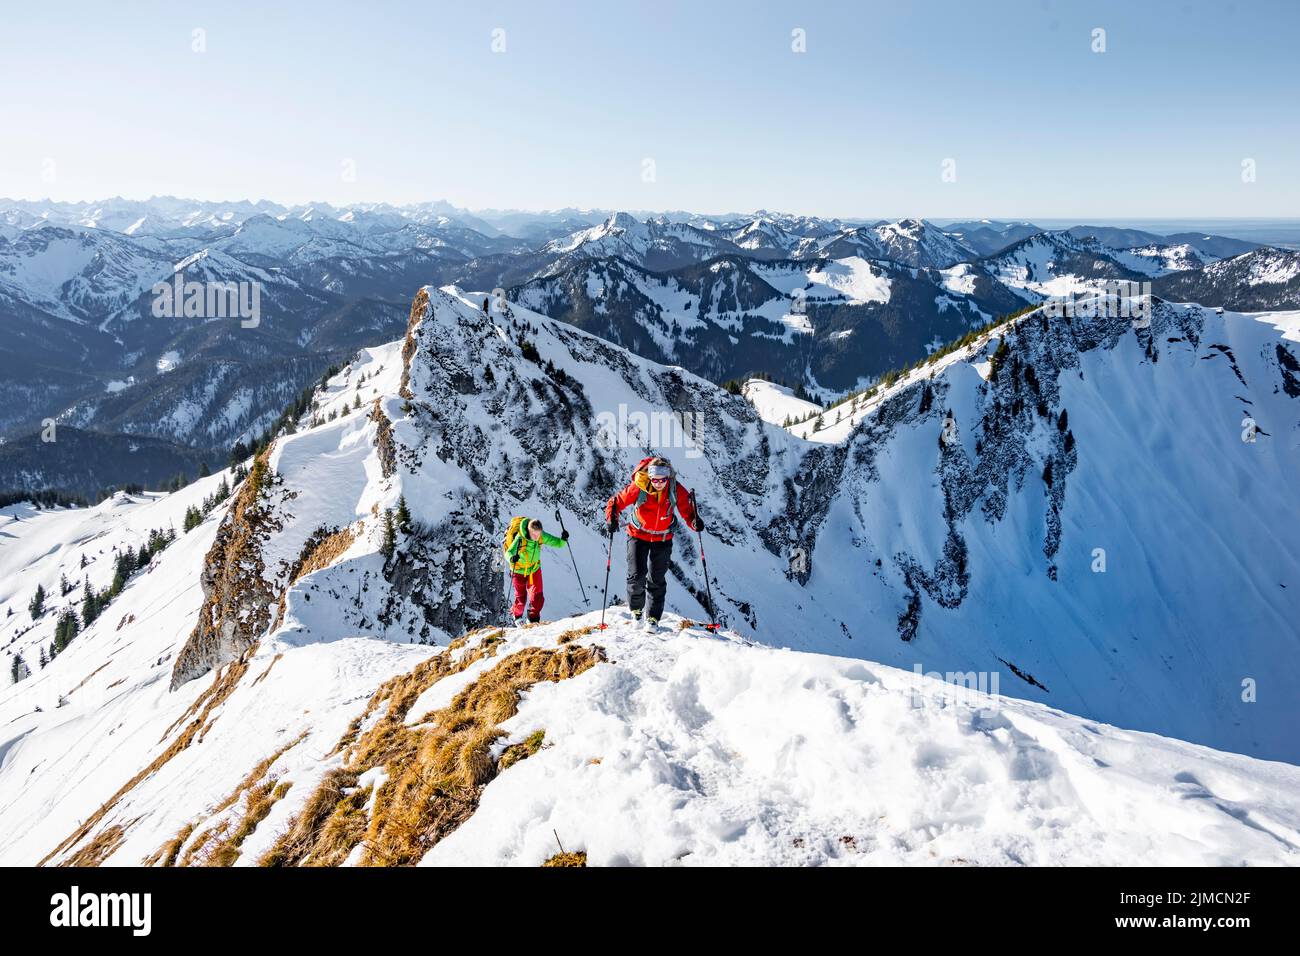 Ski tourers in winter on the snow-covered Rotwand, mountains in winter, Schlierseer Berge, Mangfall mountains, Bavaria, Germany Stock Photo